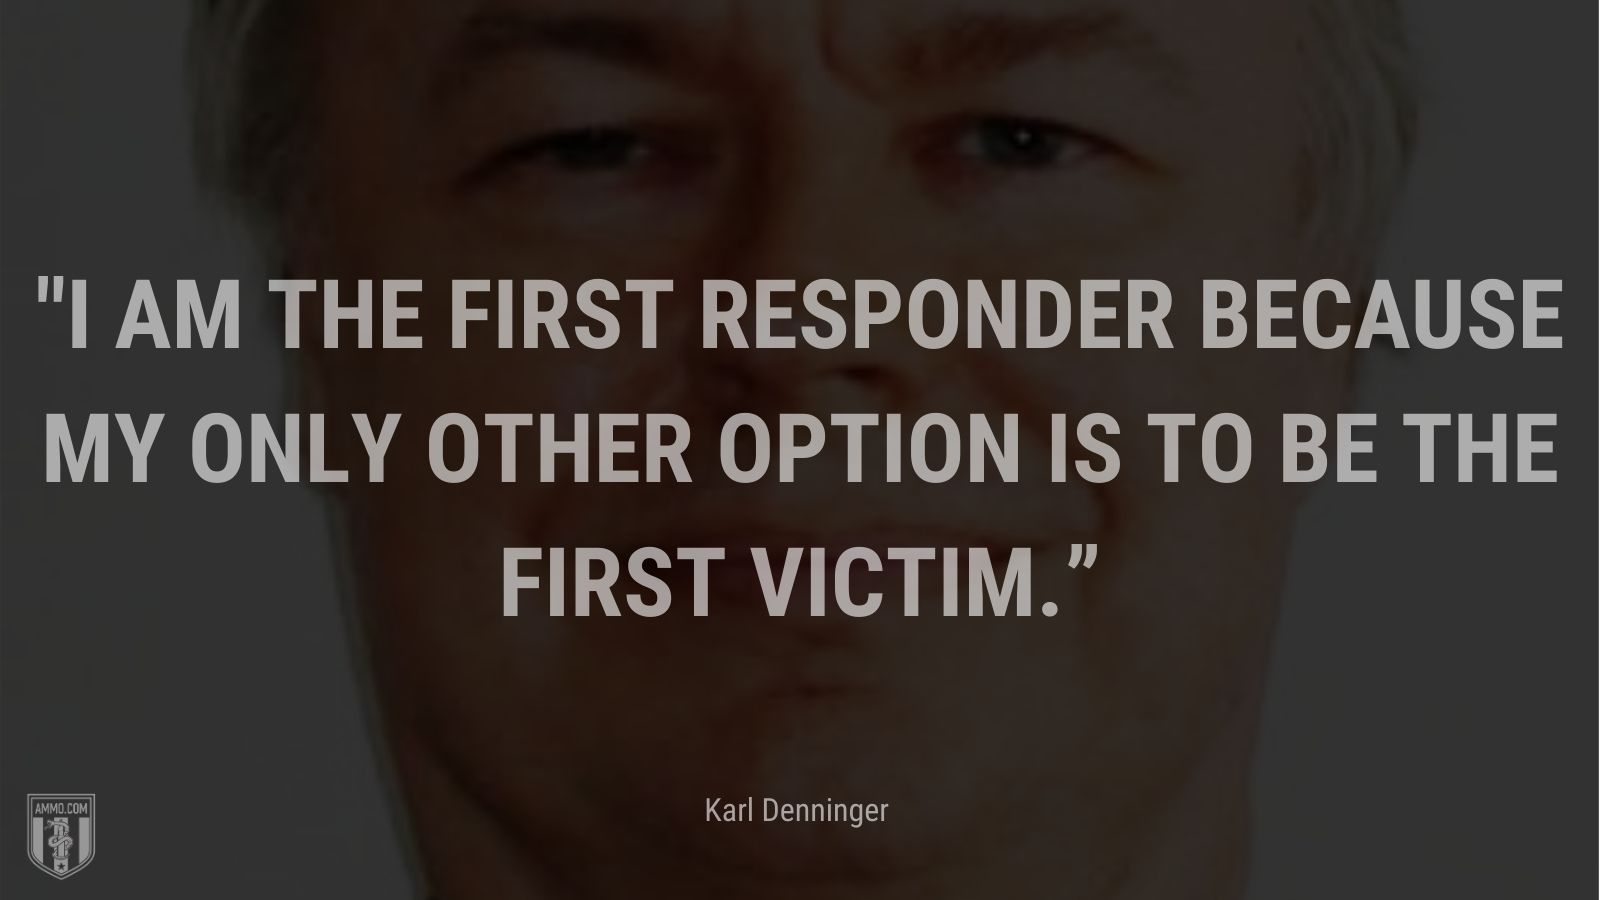 “I am the first responder because my only other option is to be the first victim.” - Karl Denninger